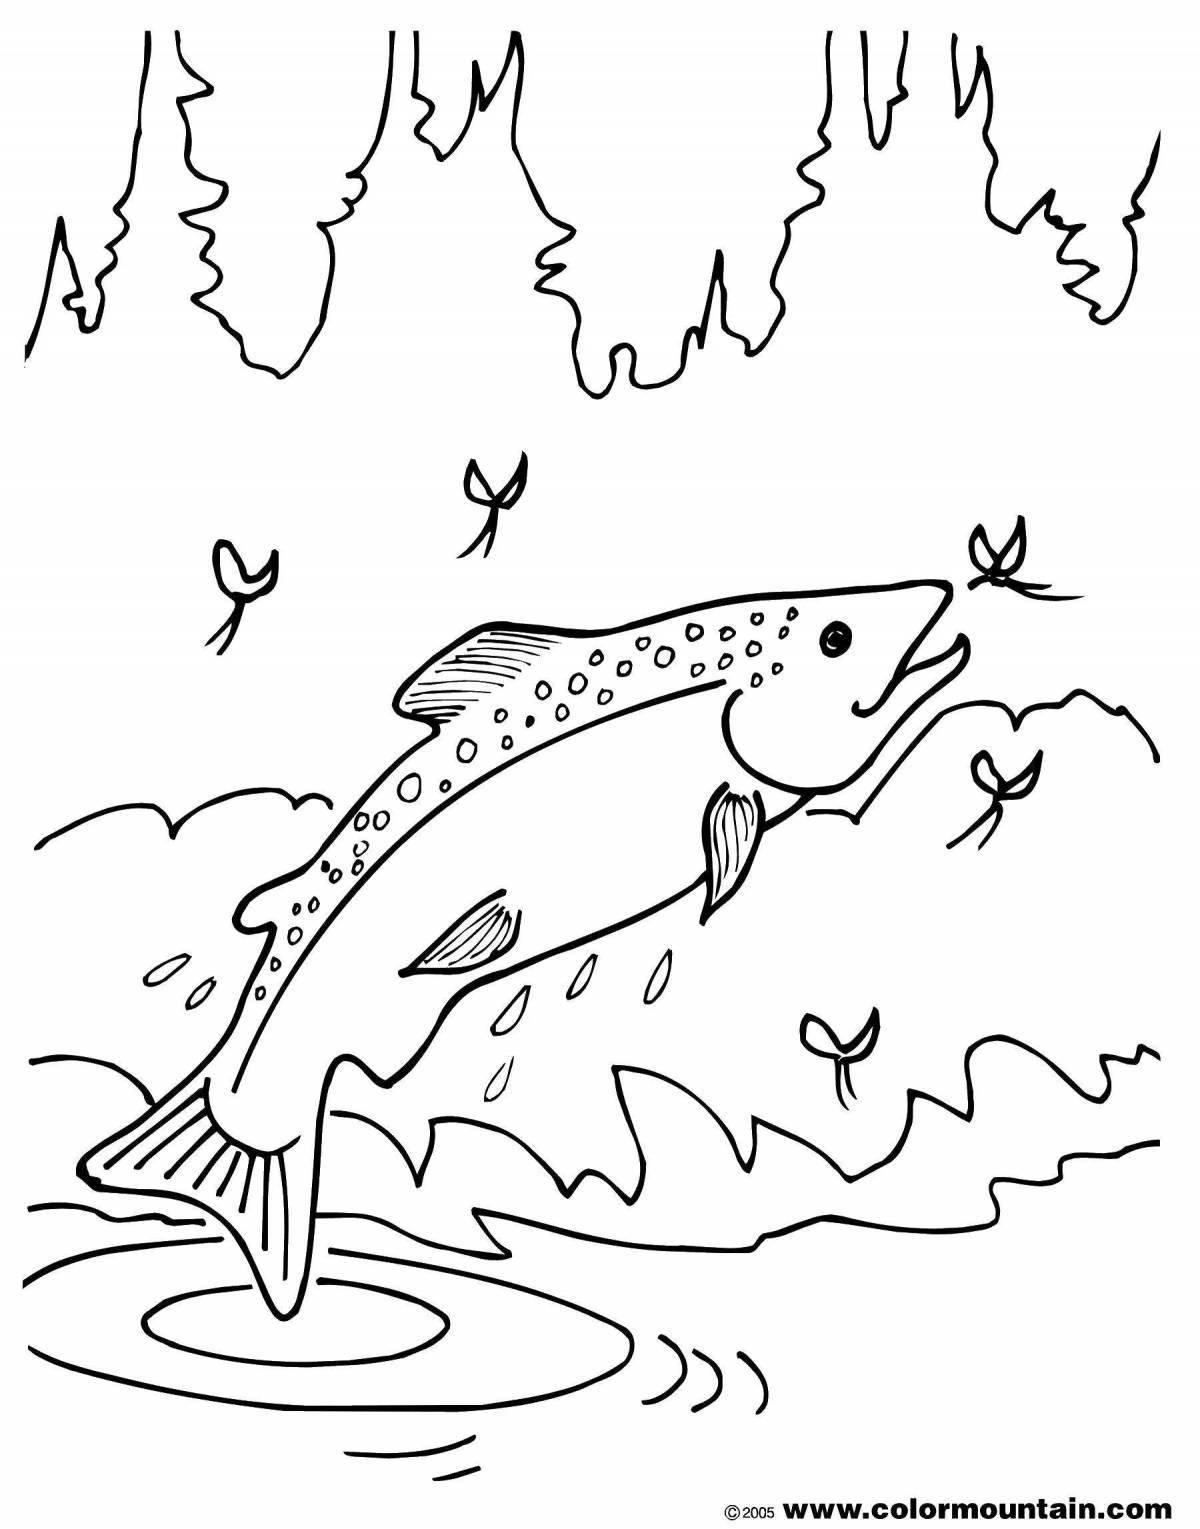 Coloring page magnificent river fish